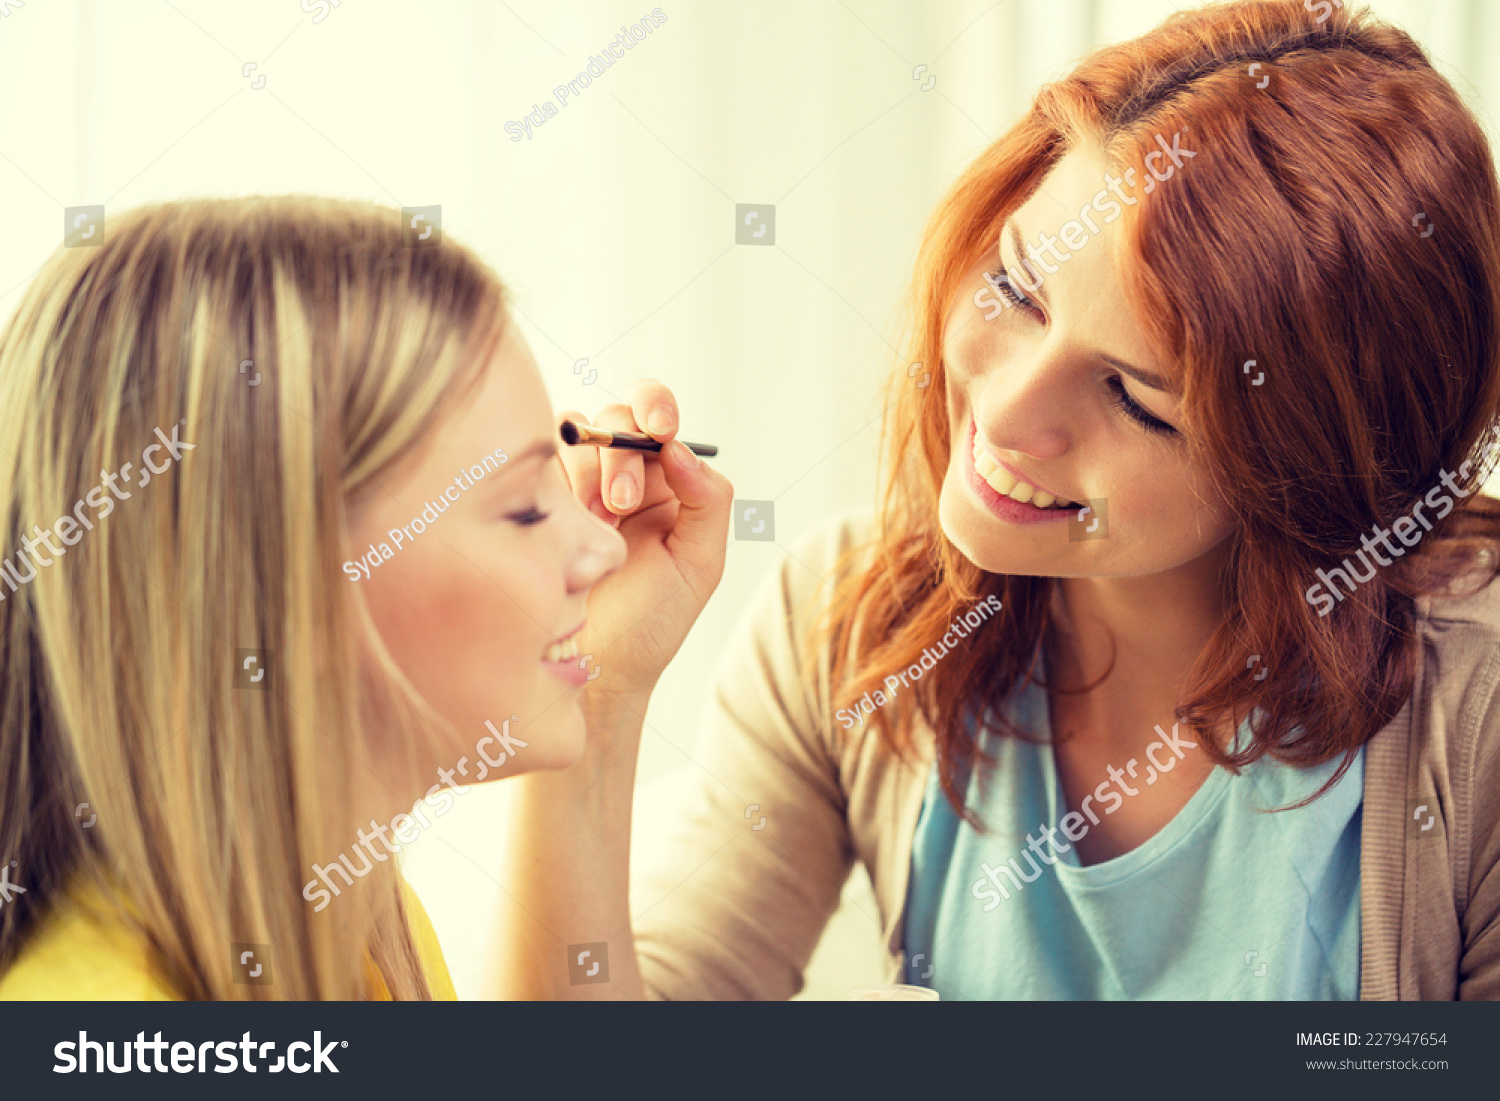 makeup, friendship and leisure concept - two smiling teenage girls applying make up at home #227947654